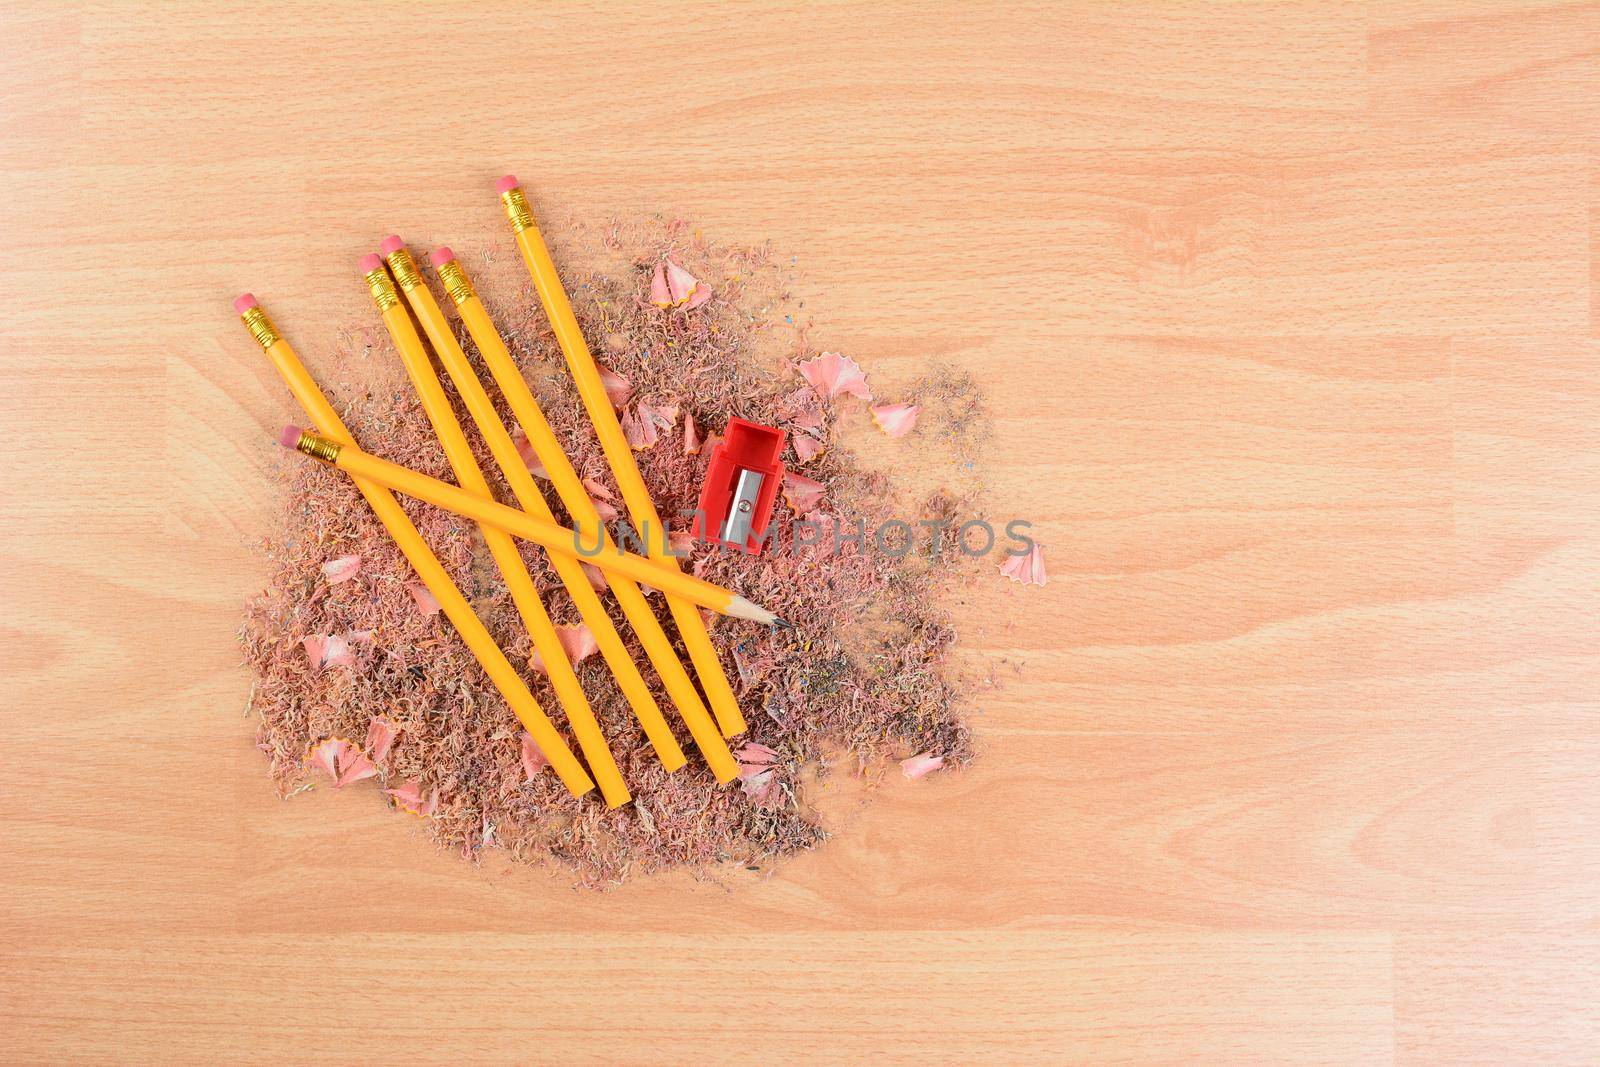 High angle view of yellow number 2 pencils on a school desk with a sharpener and shavings. Horizontal with copy space. Back to school concept.